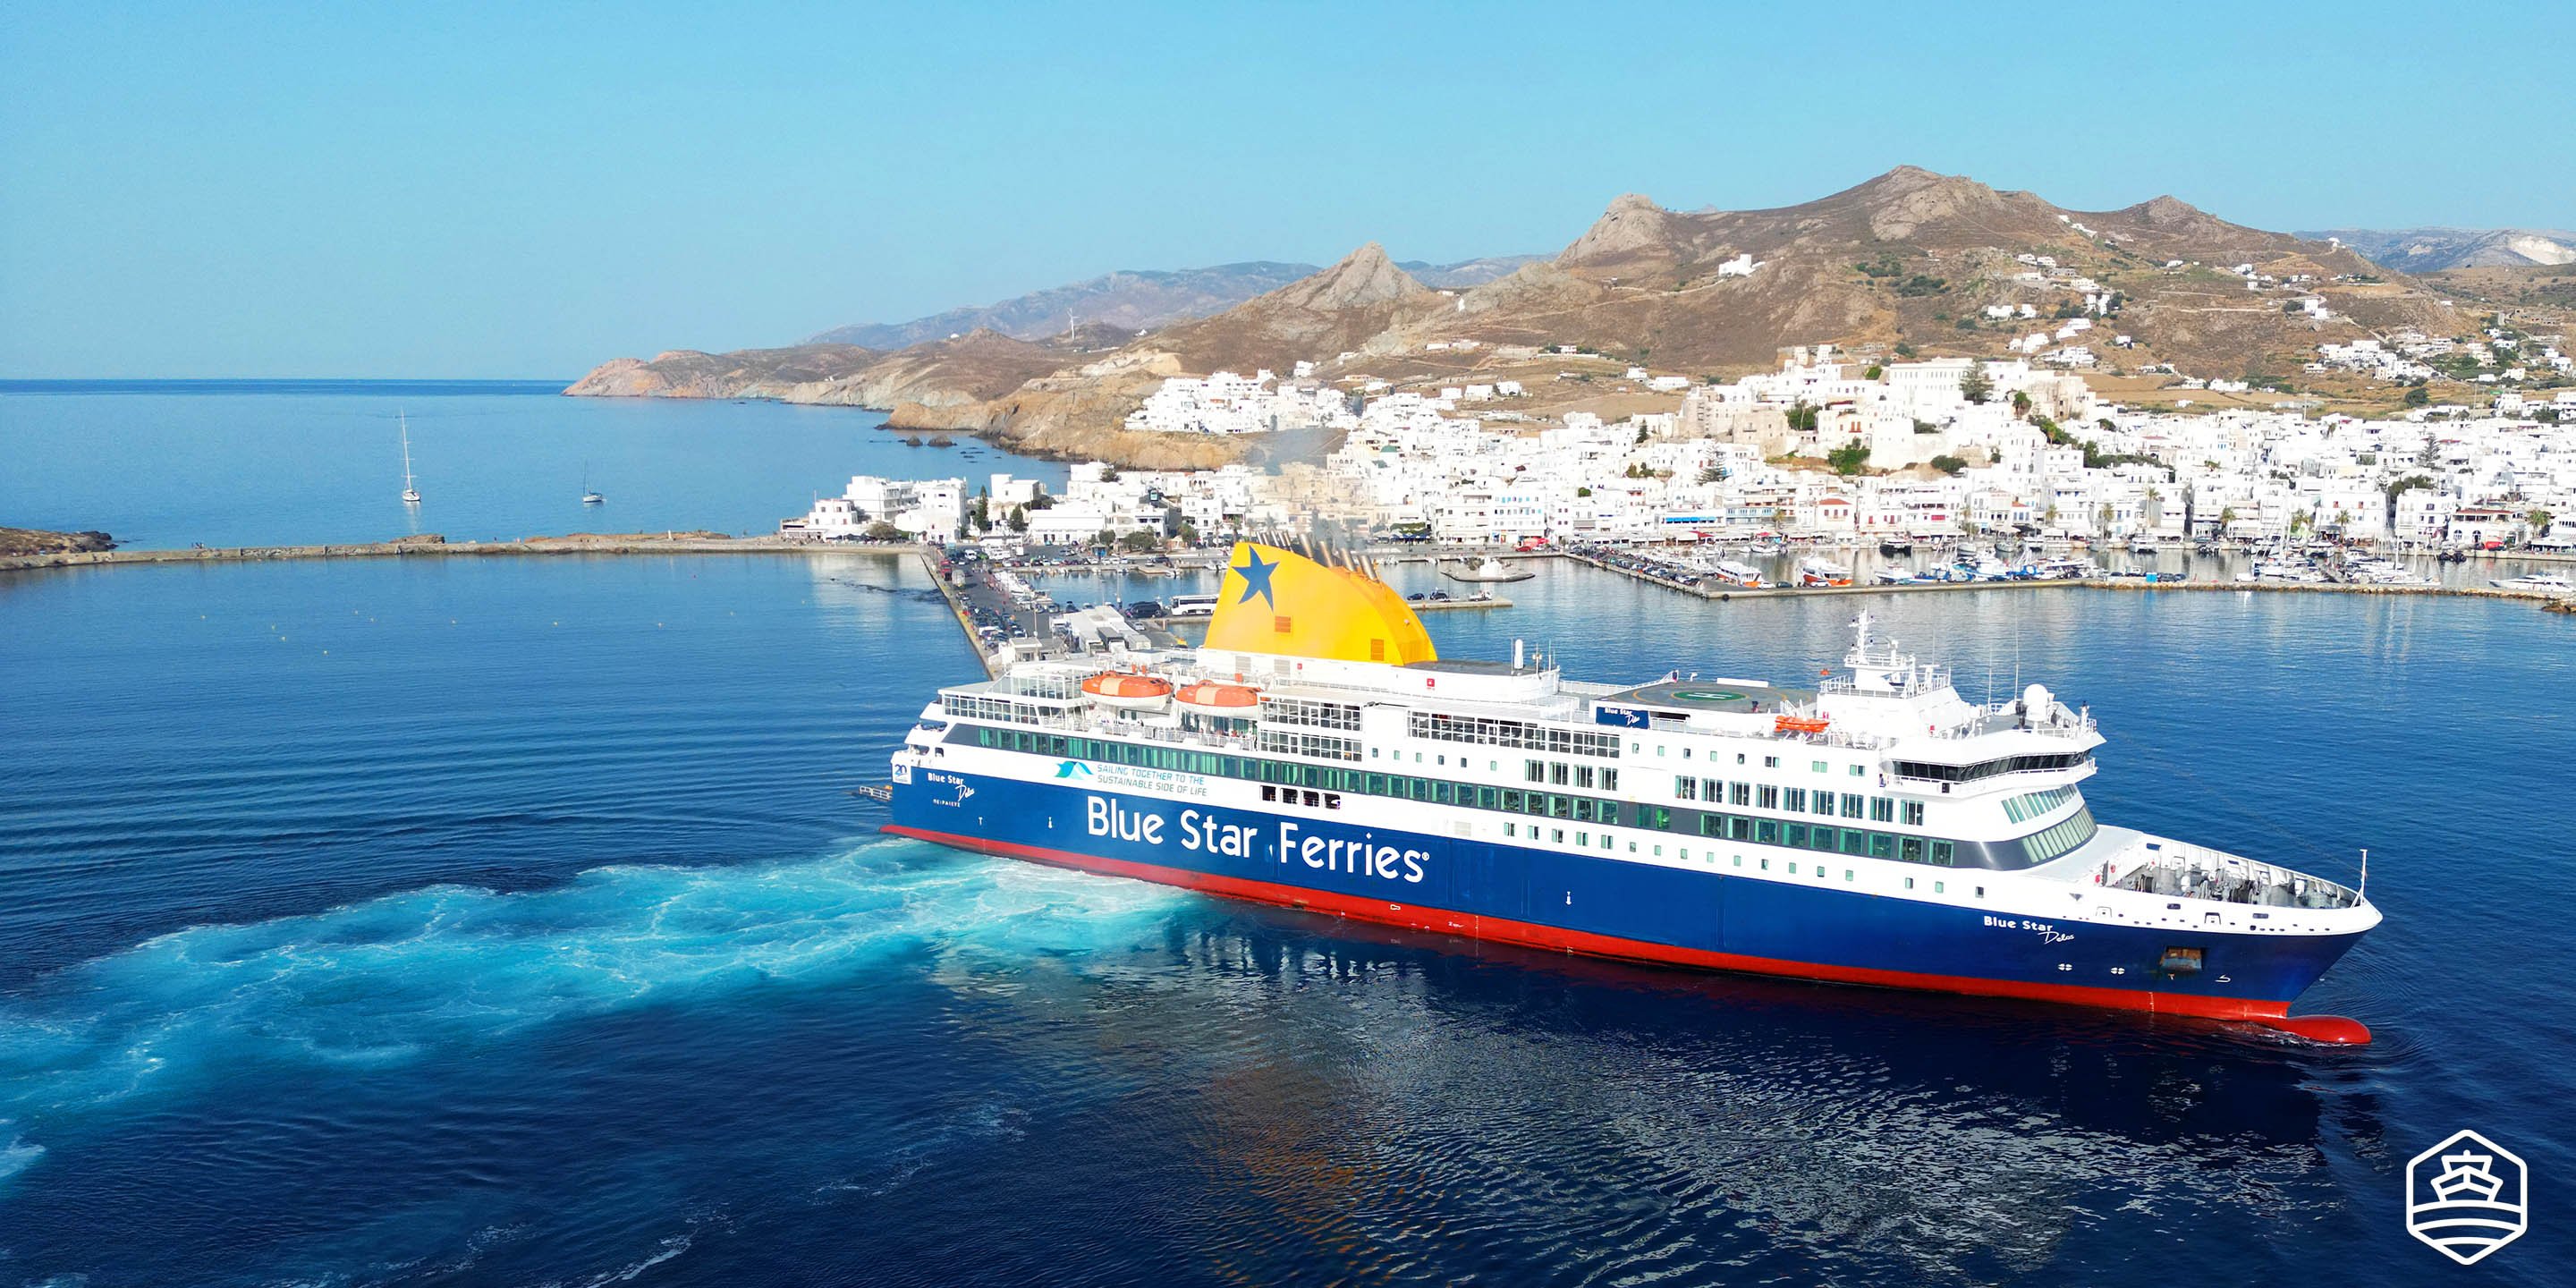 The conventional ferry Blue Star Delos arriving to Naxos from Athens and Paros ports